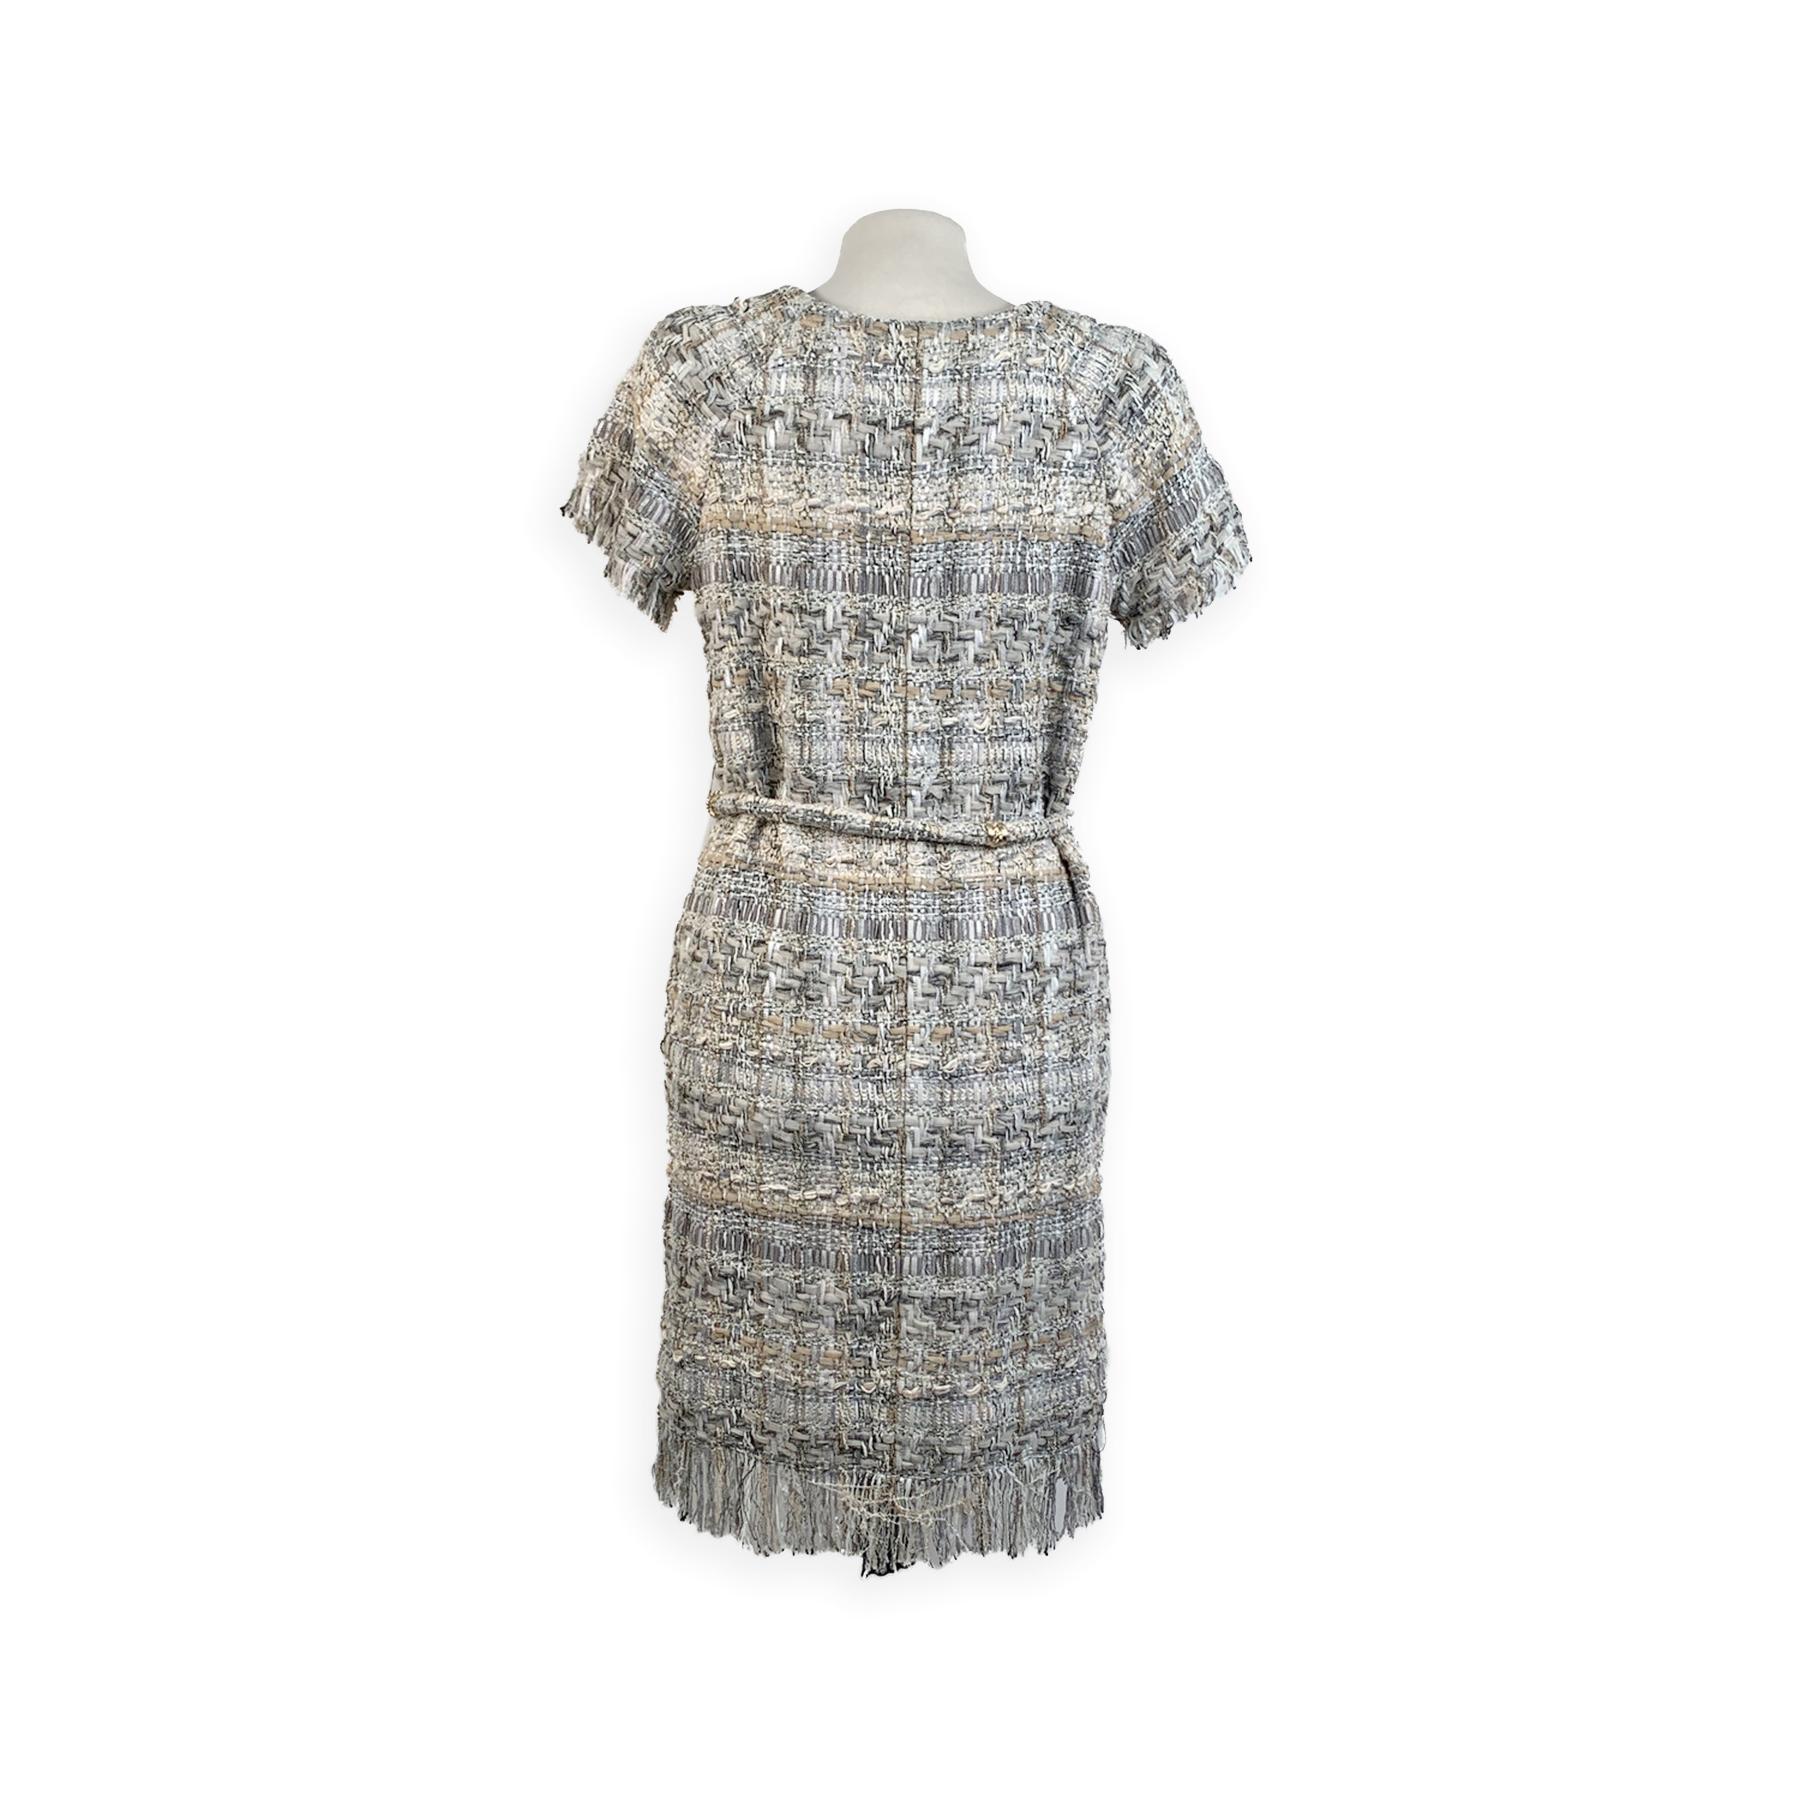 Chanel zip up grey and beige Lesage Tweed dress from the Chanel 2018 Cruise collection. The dress features short sleeve styling, a zip-through front, fringed trim and belted waistline. 2 pockets on the hips. Unlined. Composition: 30 % Nylon, 29 %